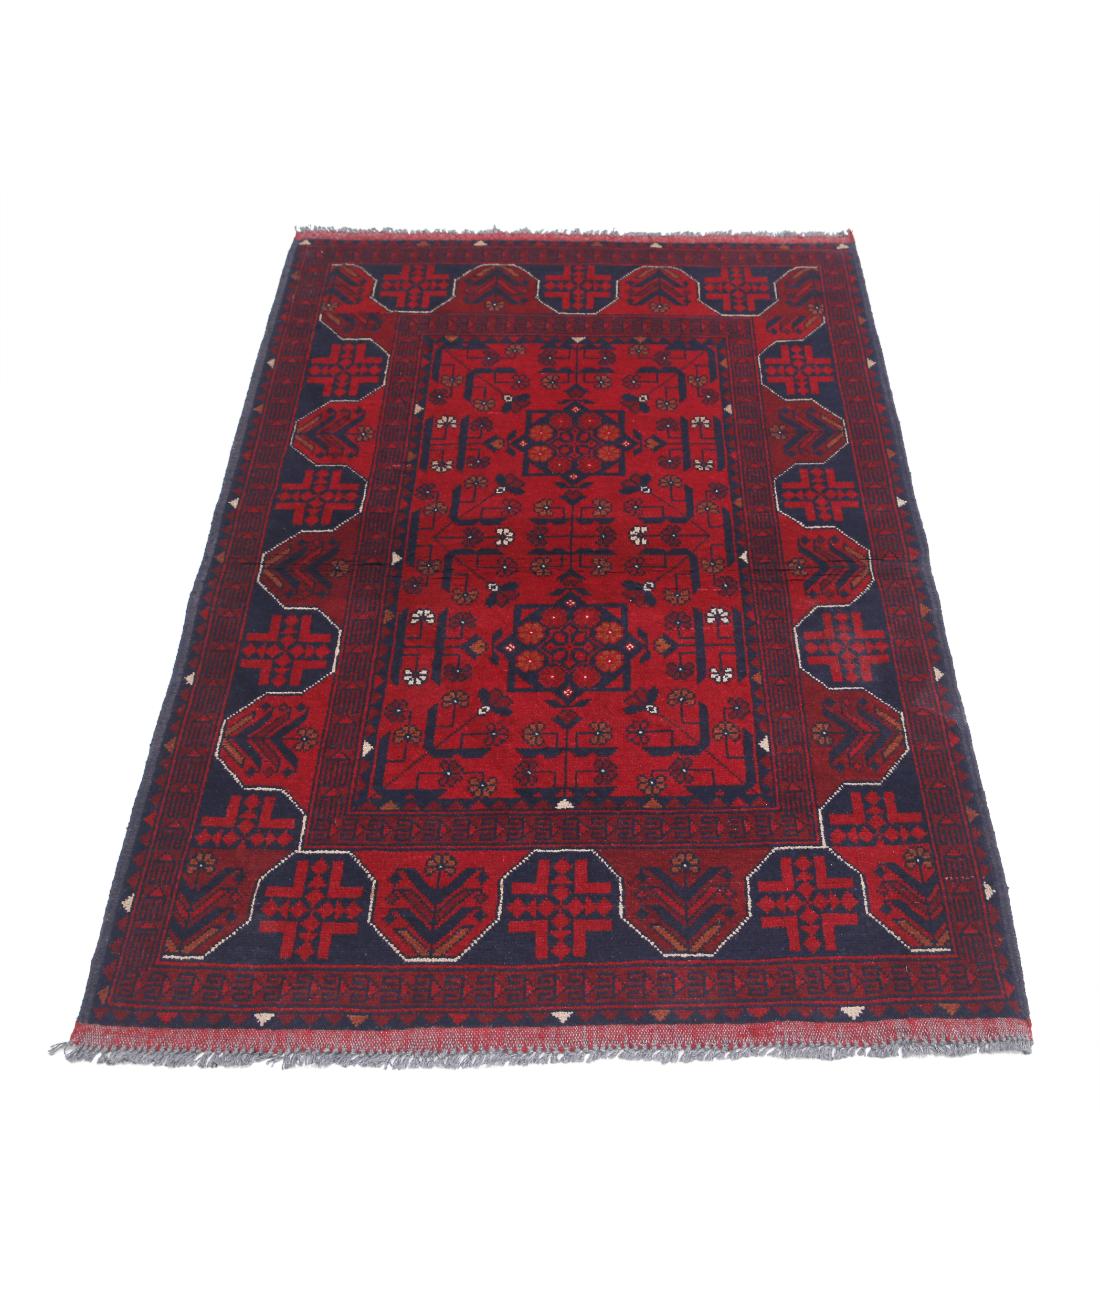 Afghan 3' 4" X 4' 11" Hand-Knotted Wool Rug 3' 4" X 4' 11" (102 X 150) / Red / Blue